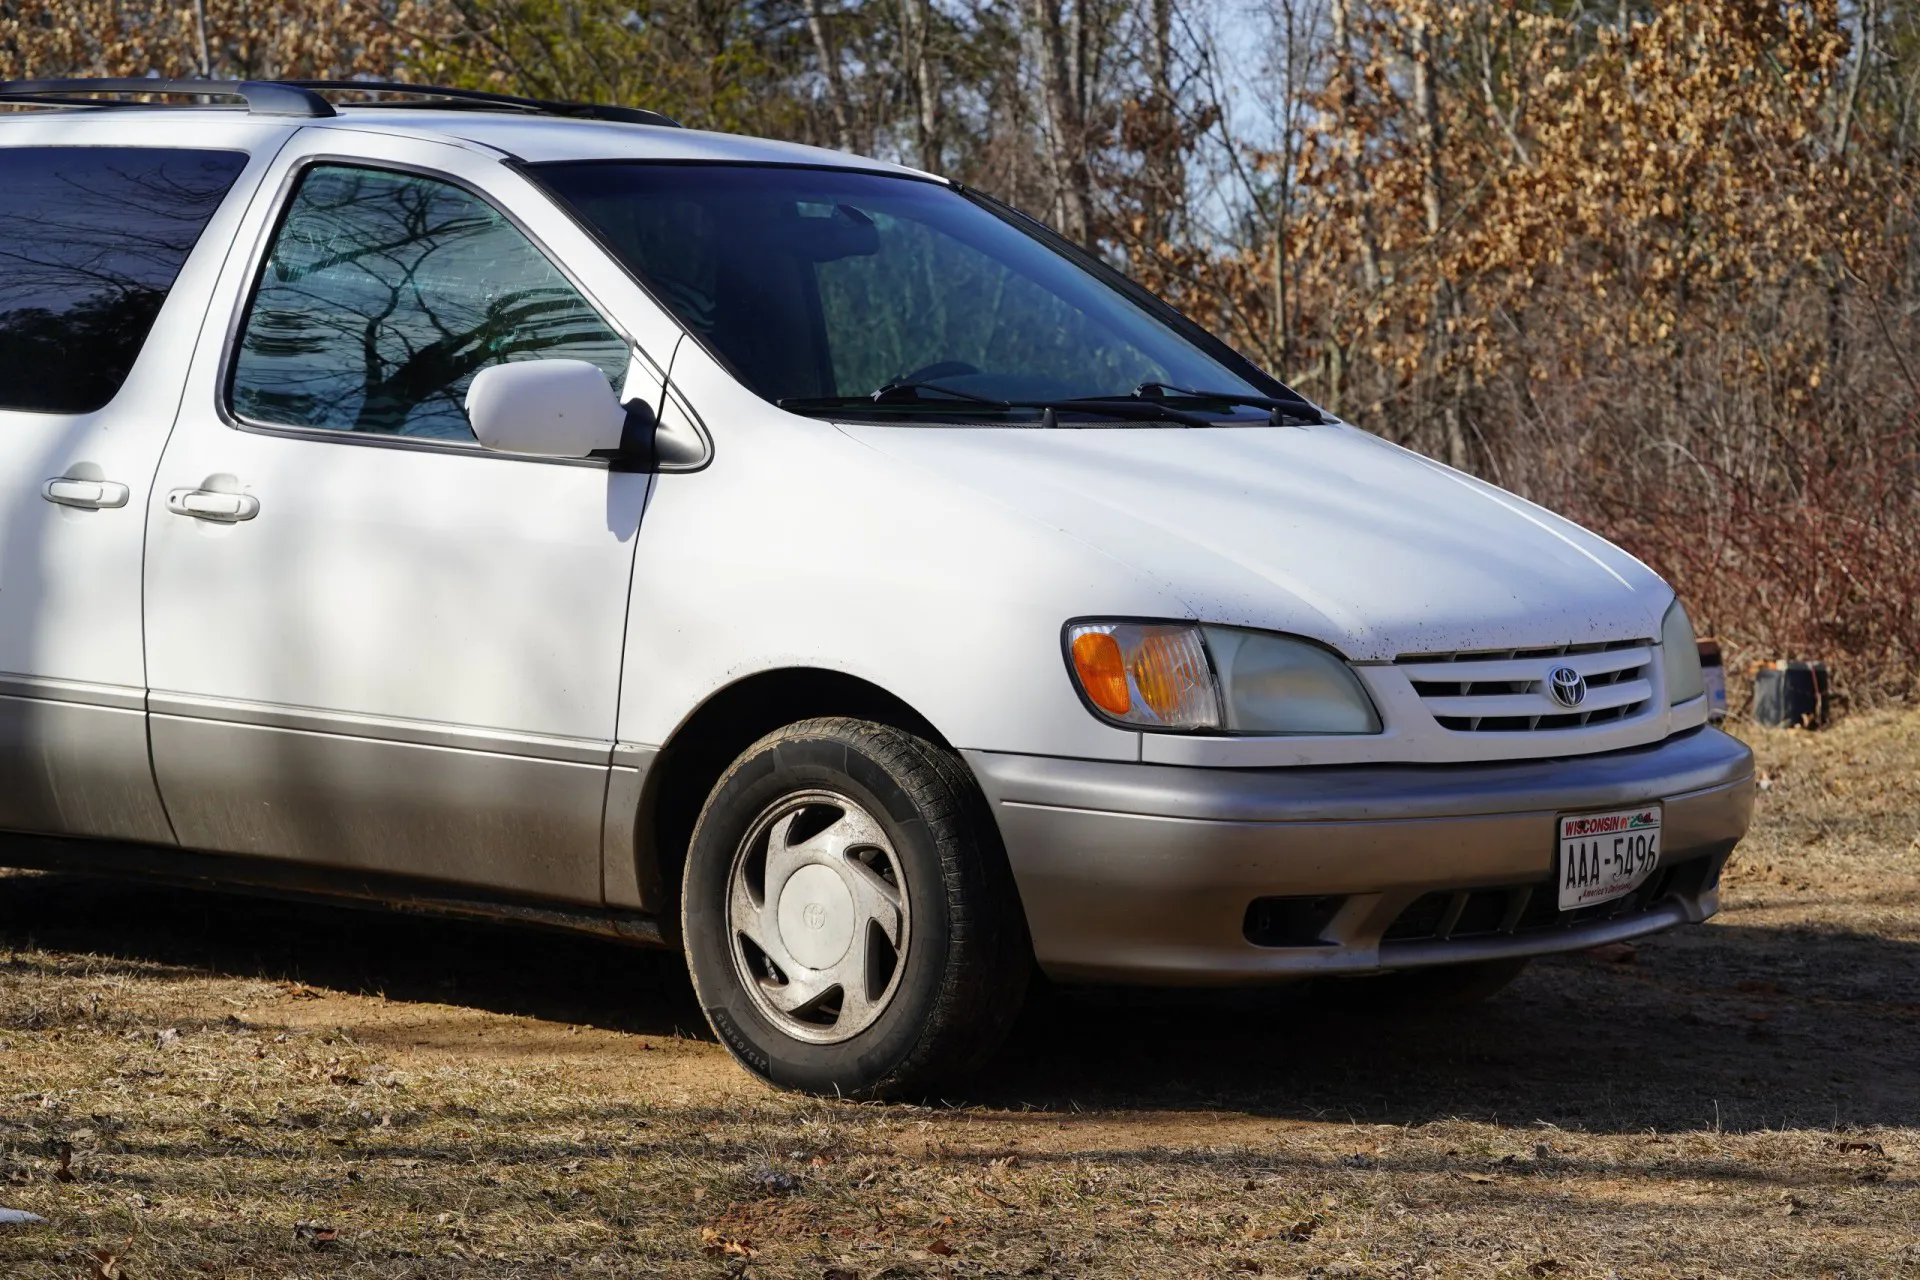 A 2002 White Toyota Sienna sits parked outside.